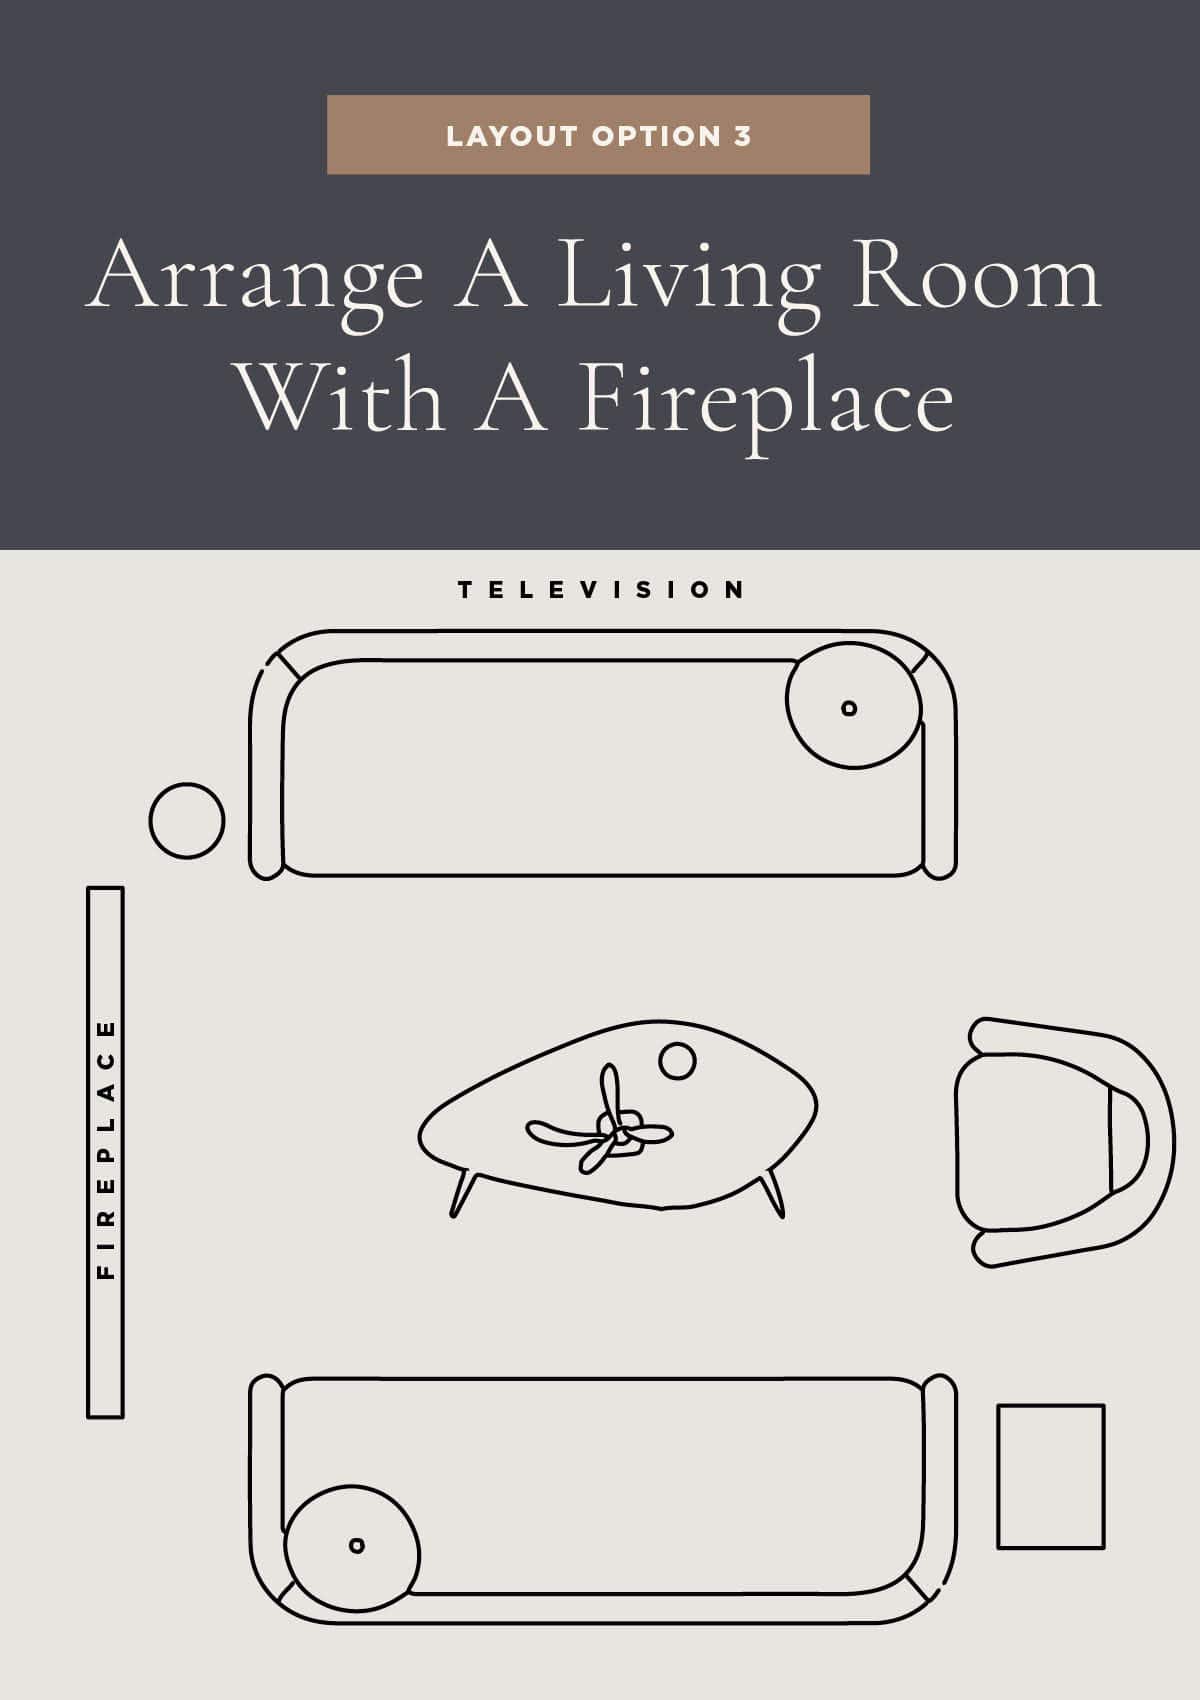 Arrange A Living Room With Fireplace